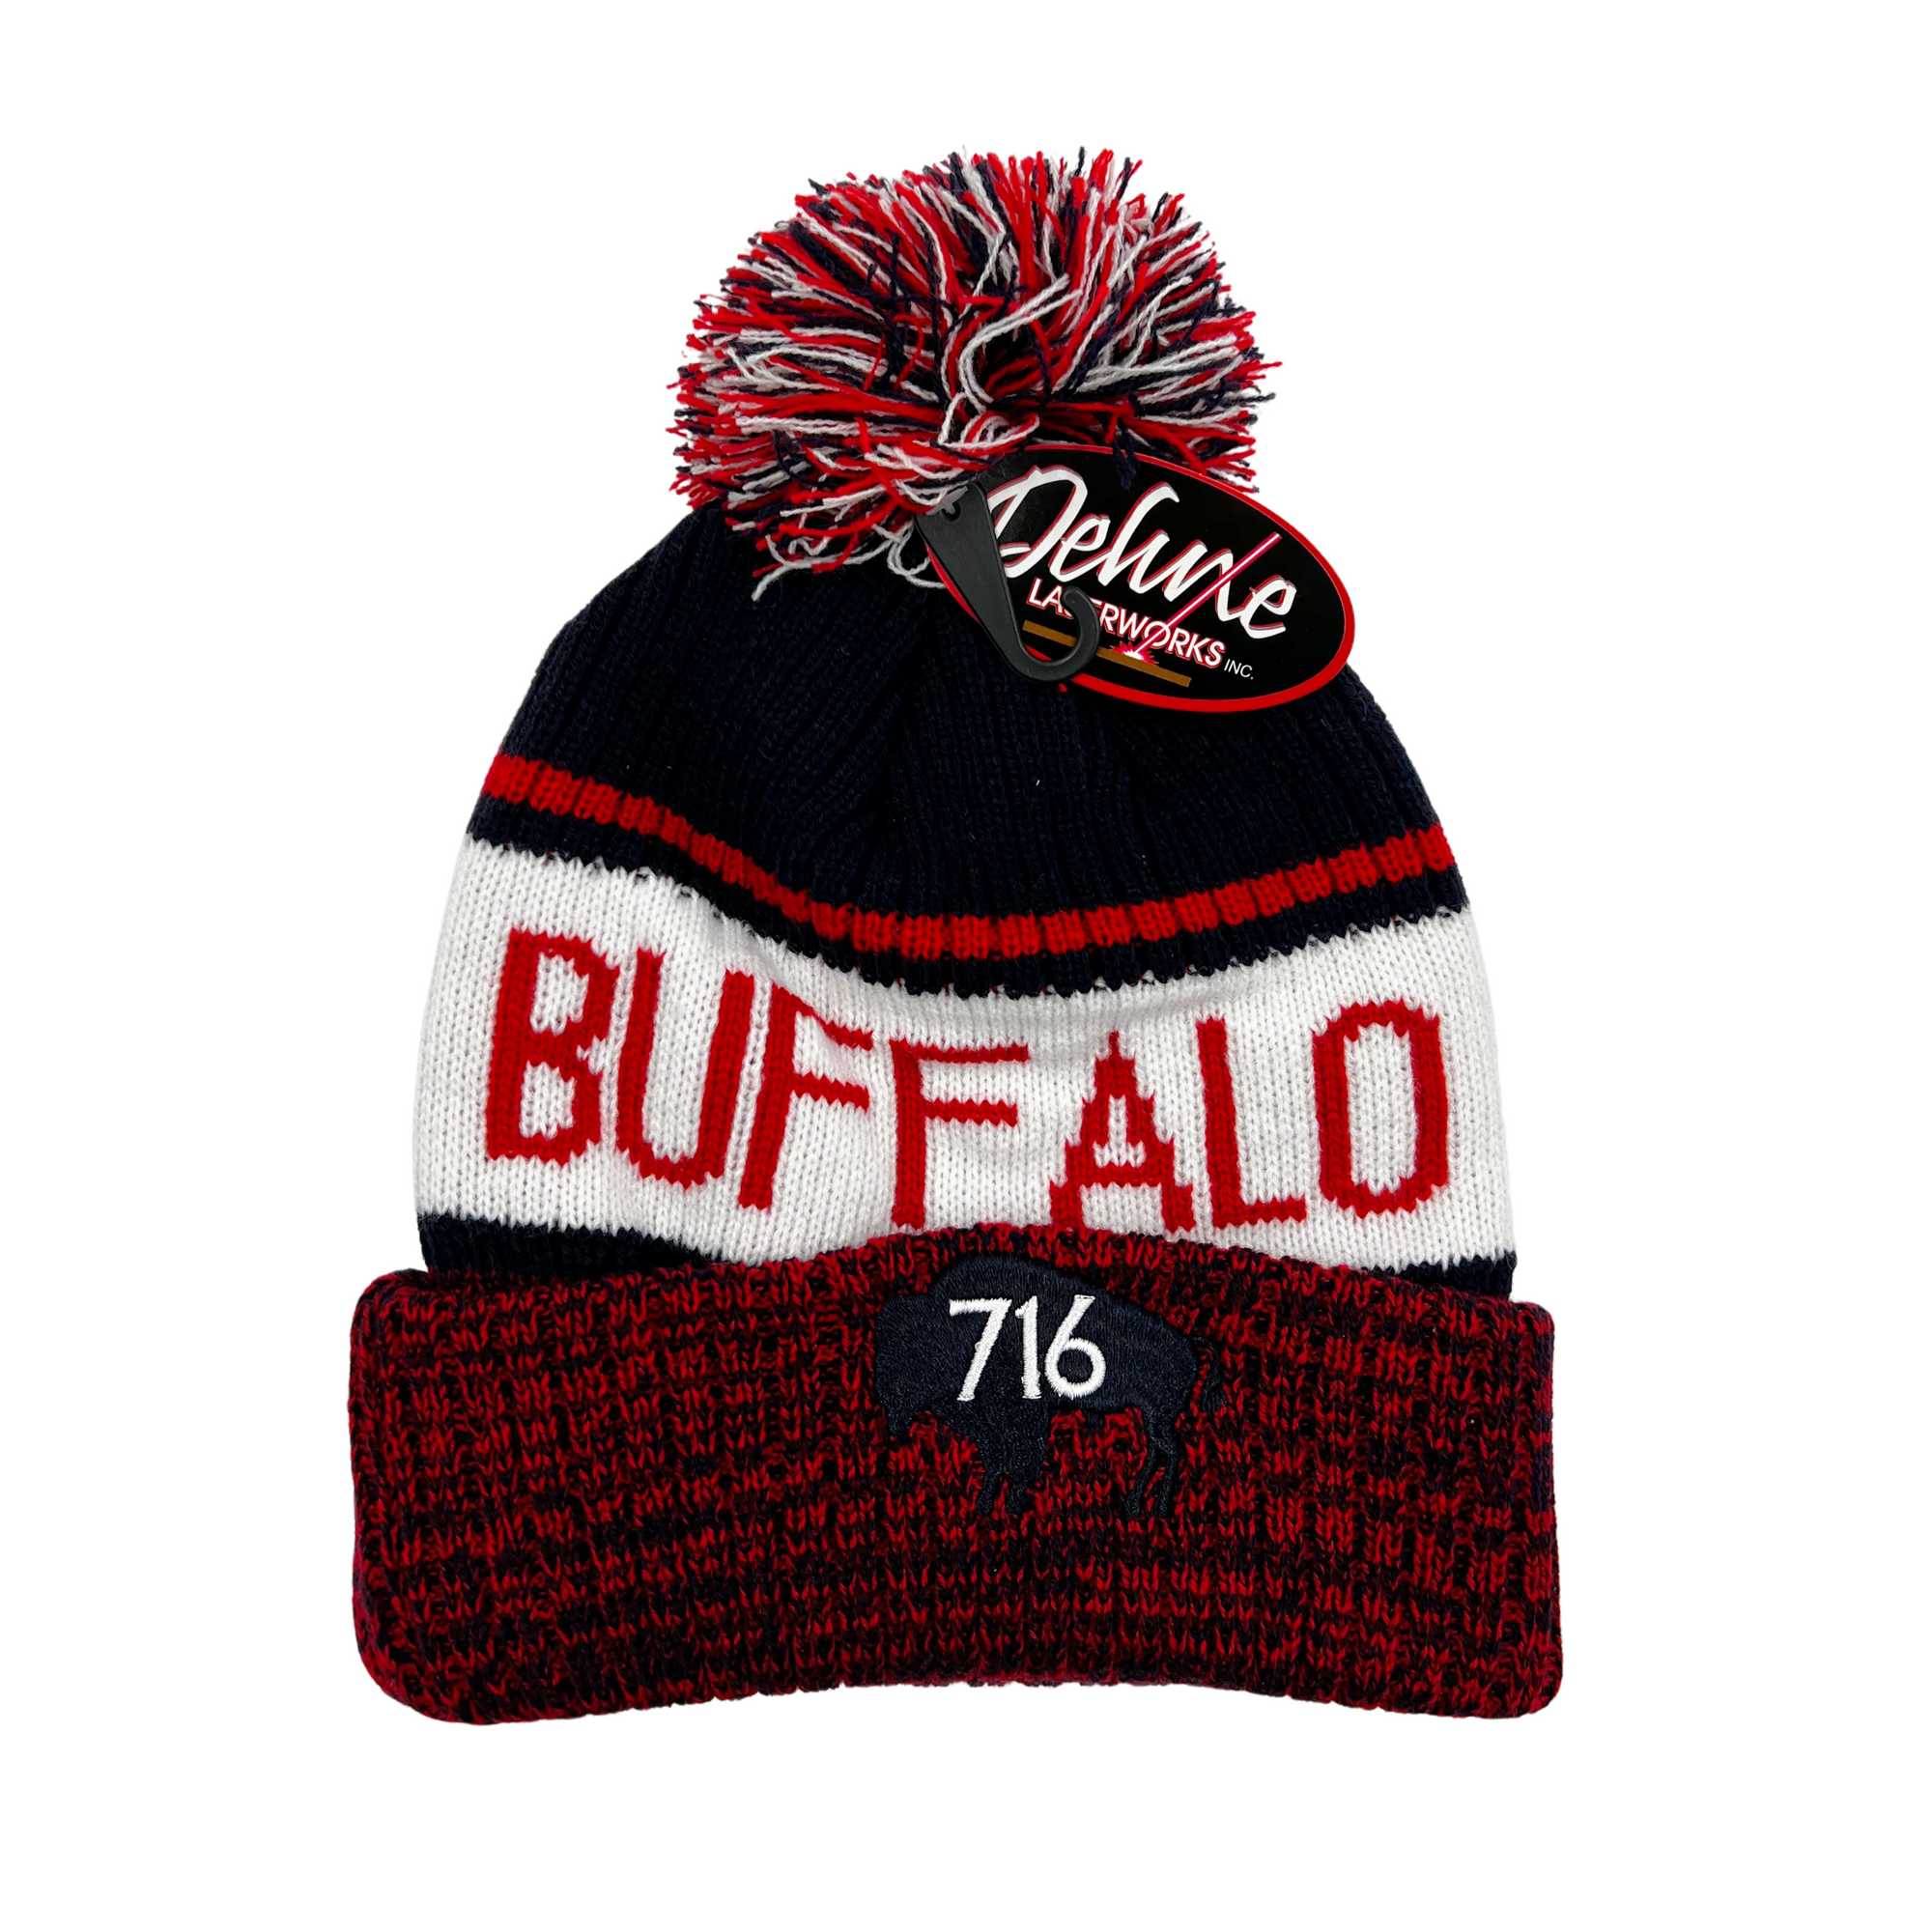 Buffalo 716 Black, Red, and White Winter Knit Hat